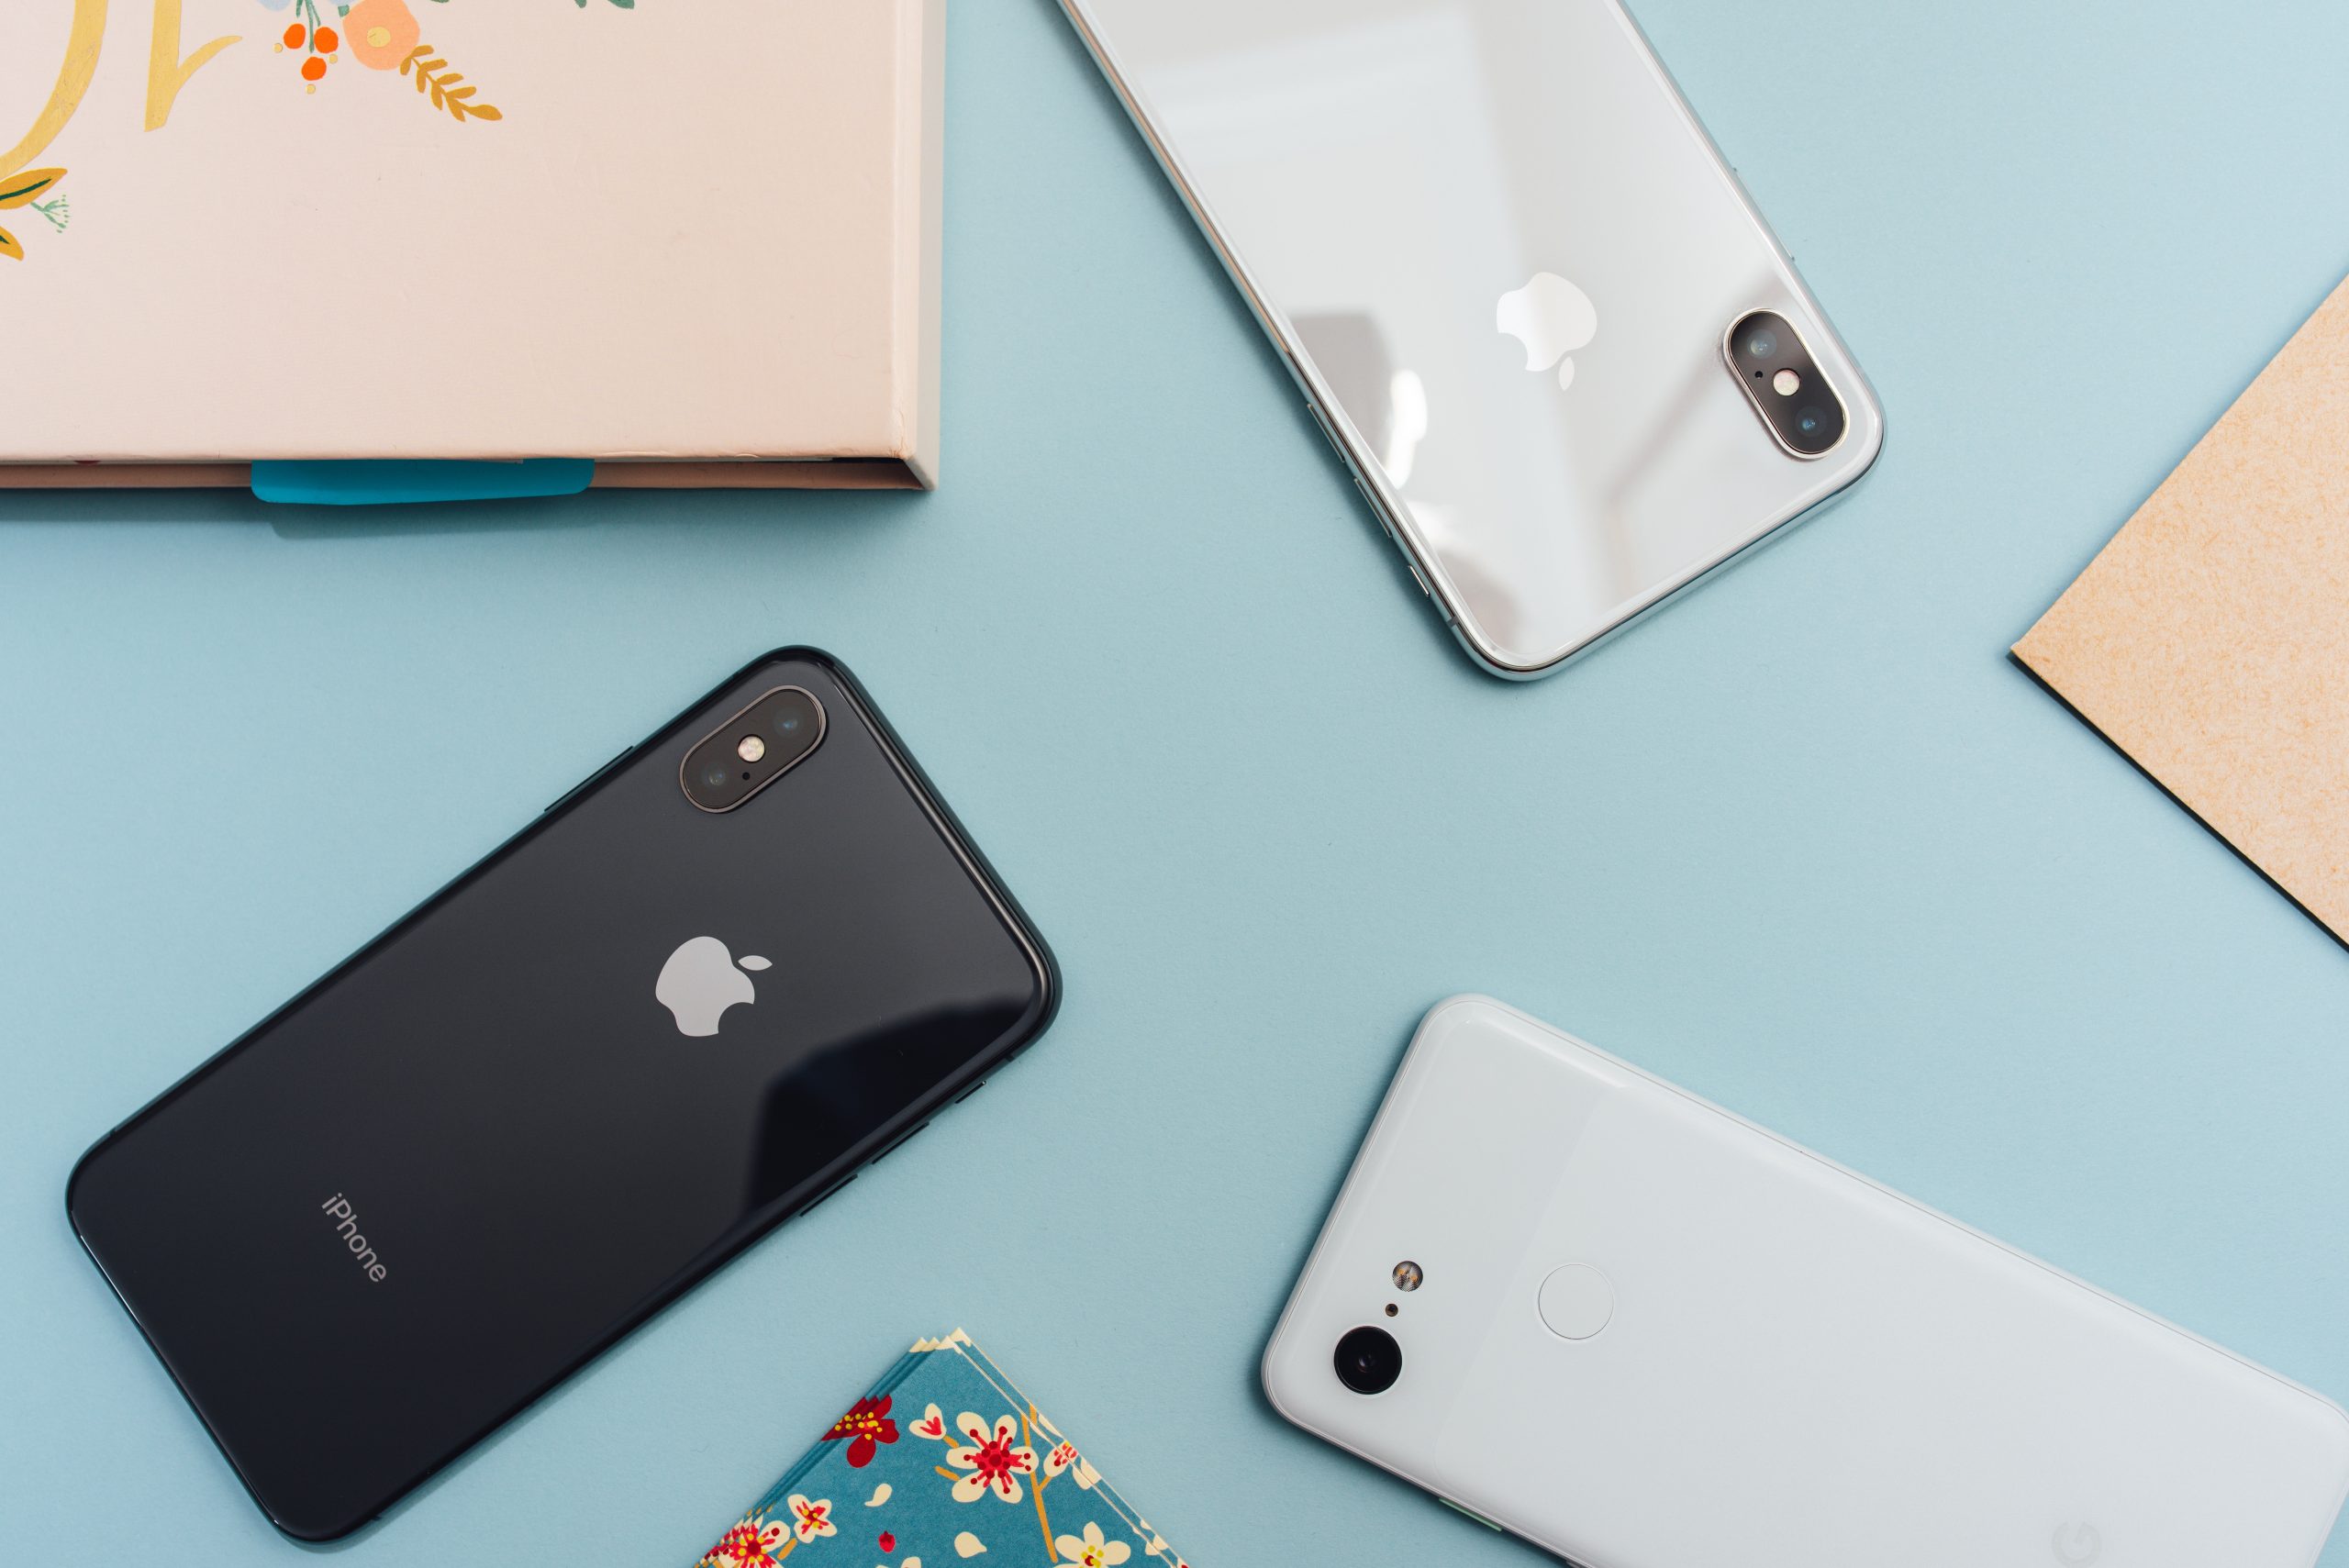 The Ultimate Guide to Choosing the Best iPhone Reviews and Comparisons